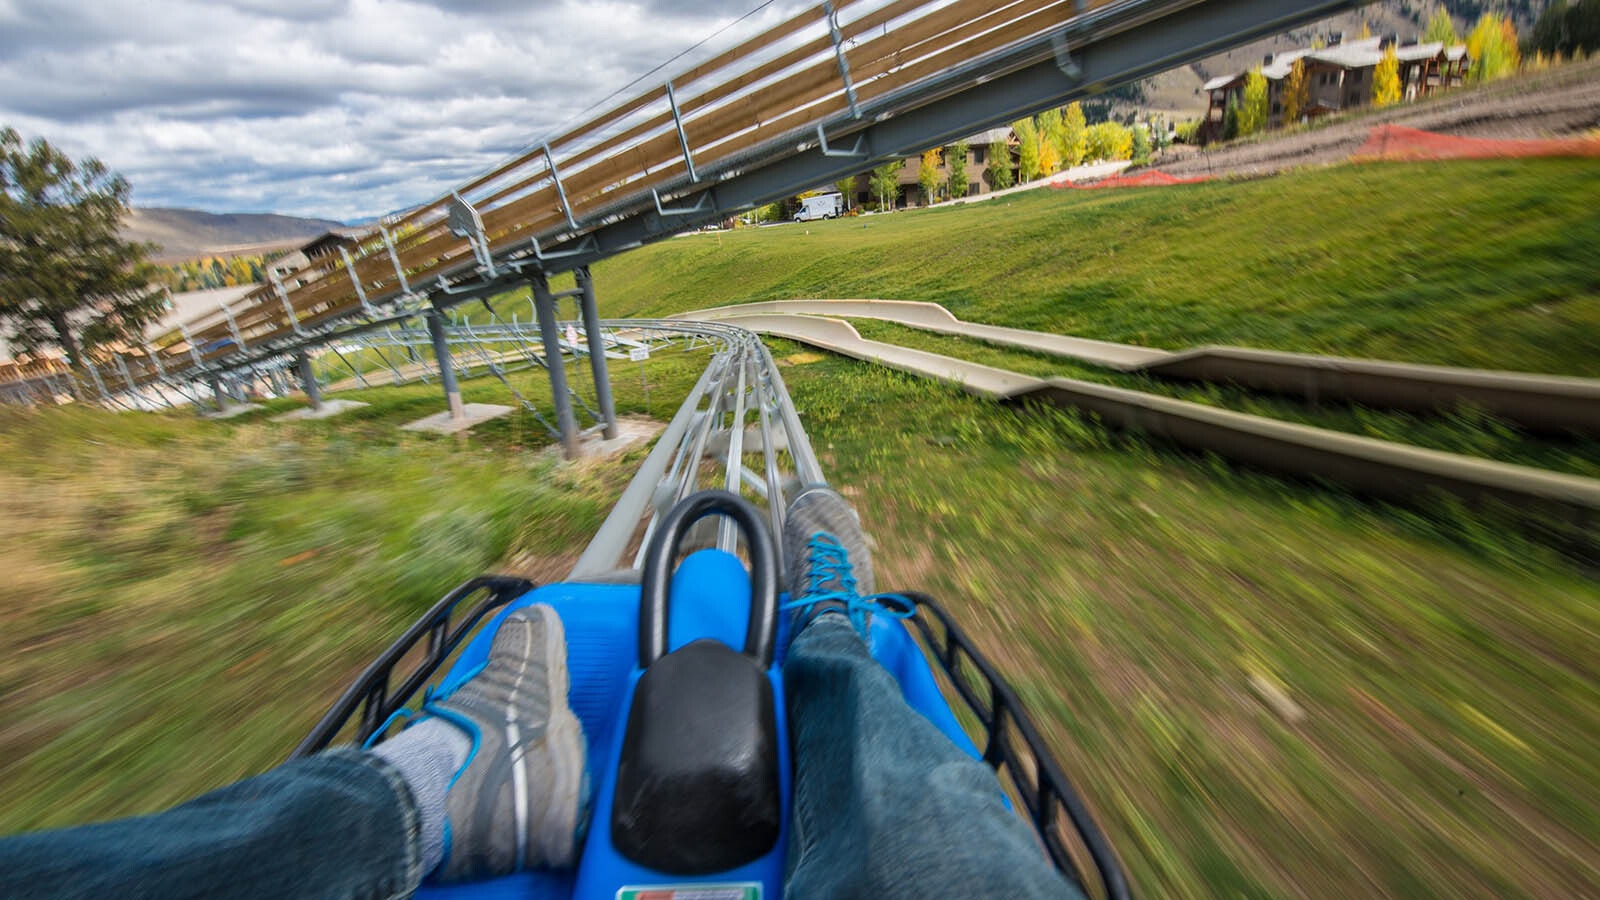 The Cowboy Coaster can hit speeds of 26 mph.